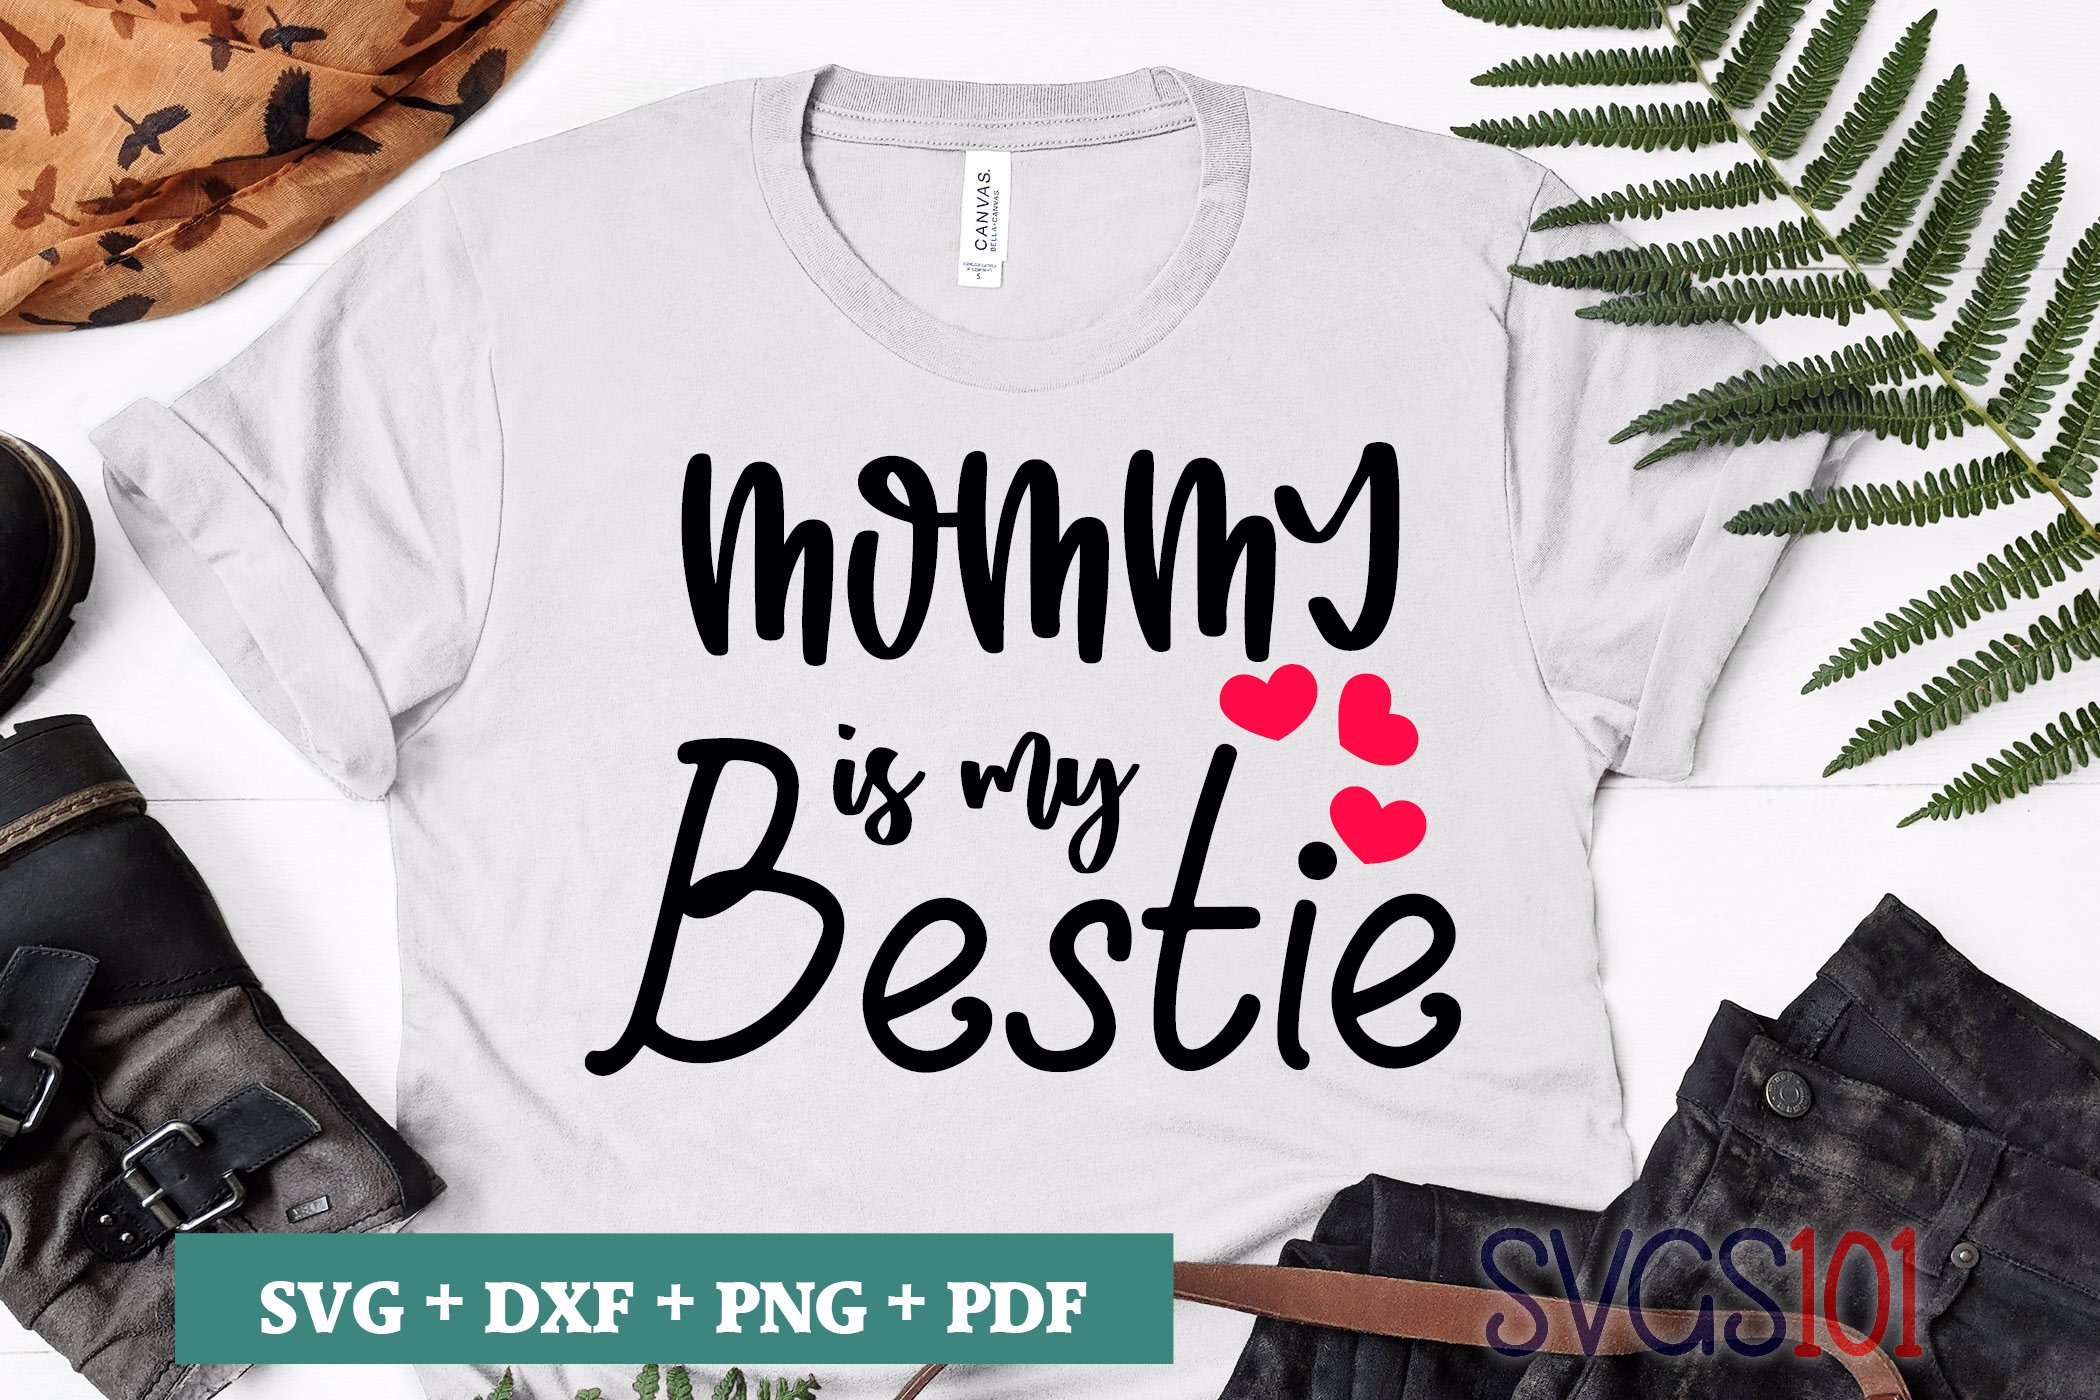 Download Mommy Is My Bestie SVG Cuttable file - DXF, EPS, PNG, PDF | SVG Cutting File